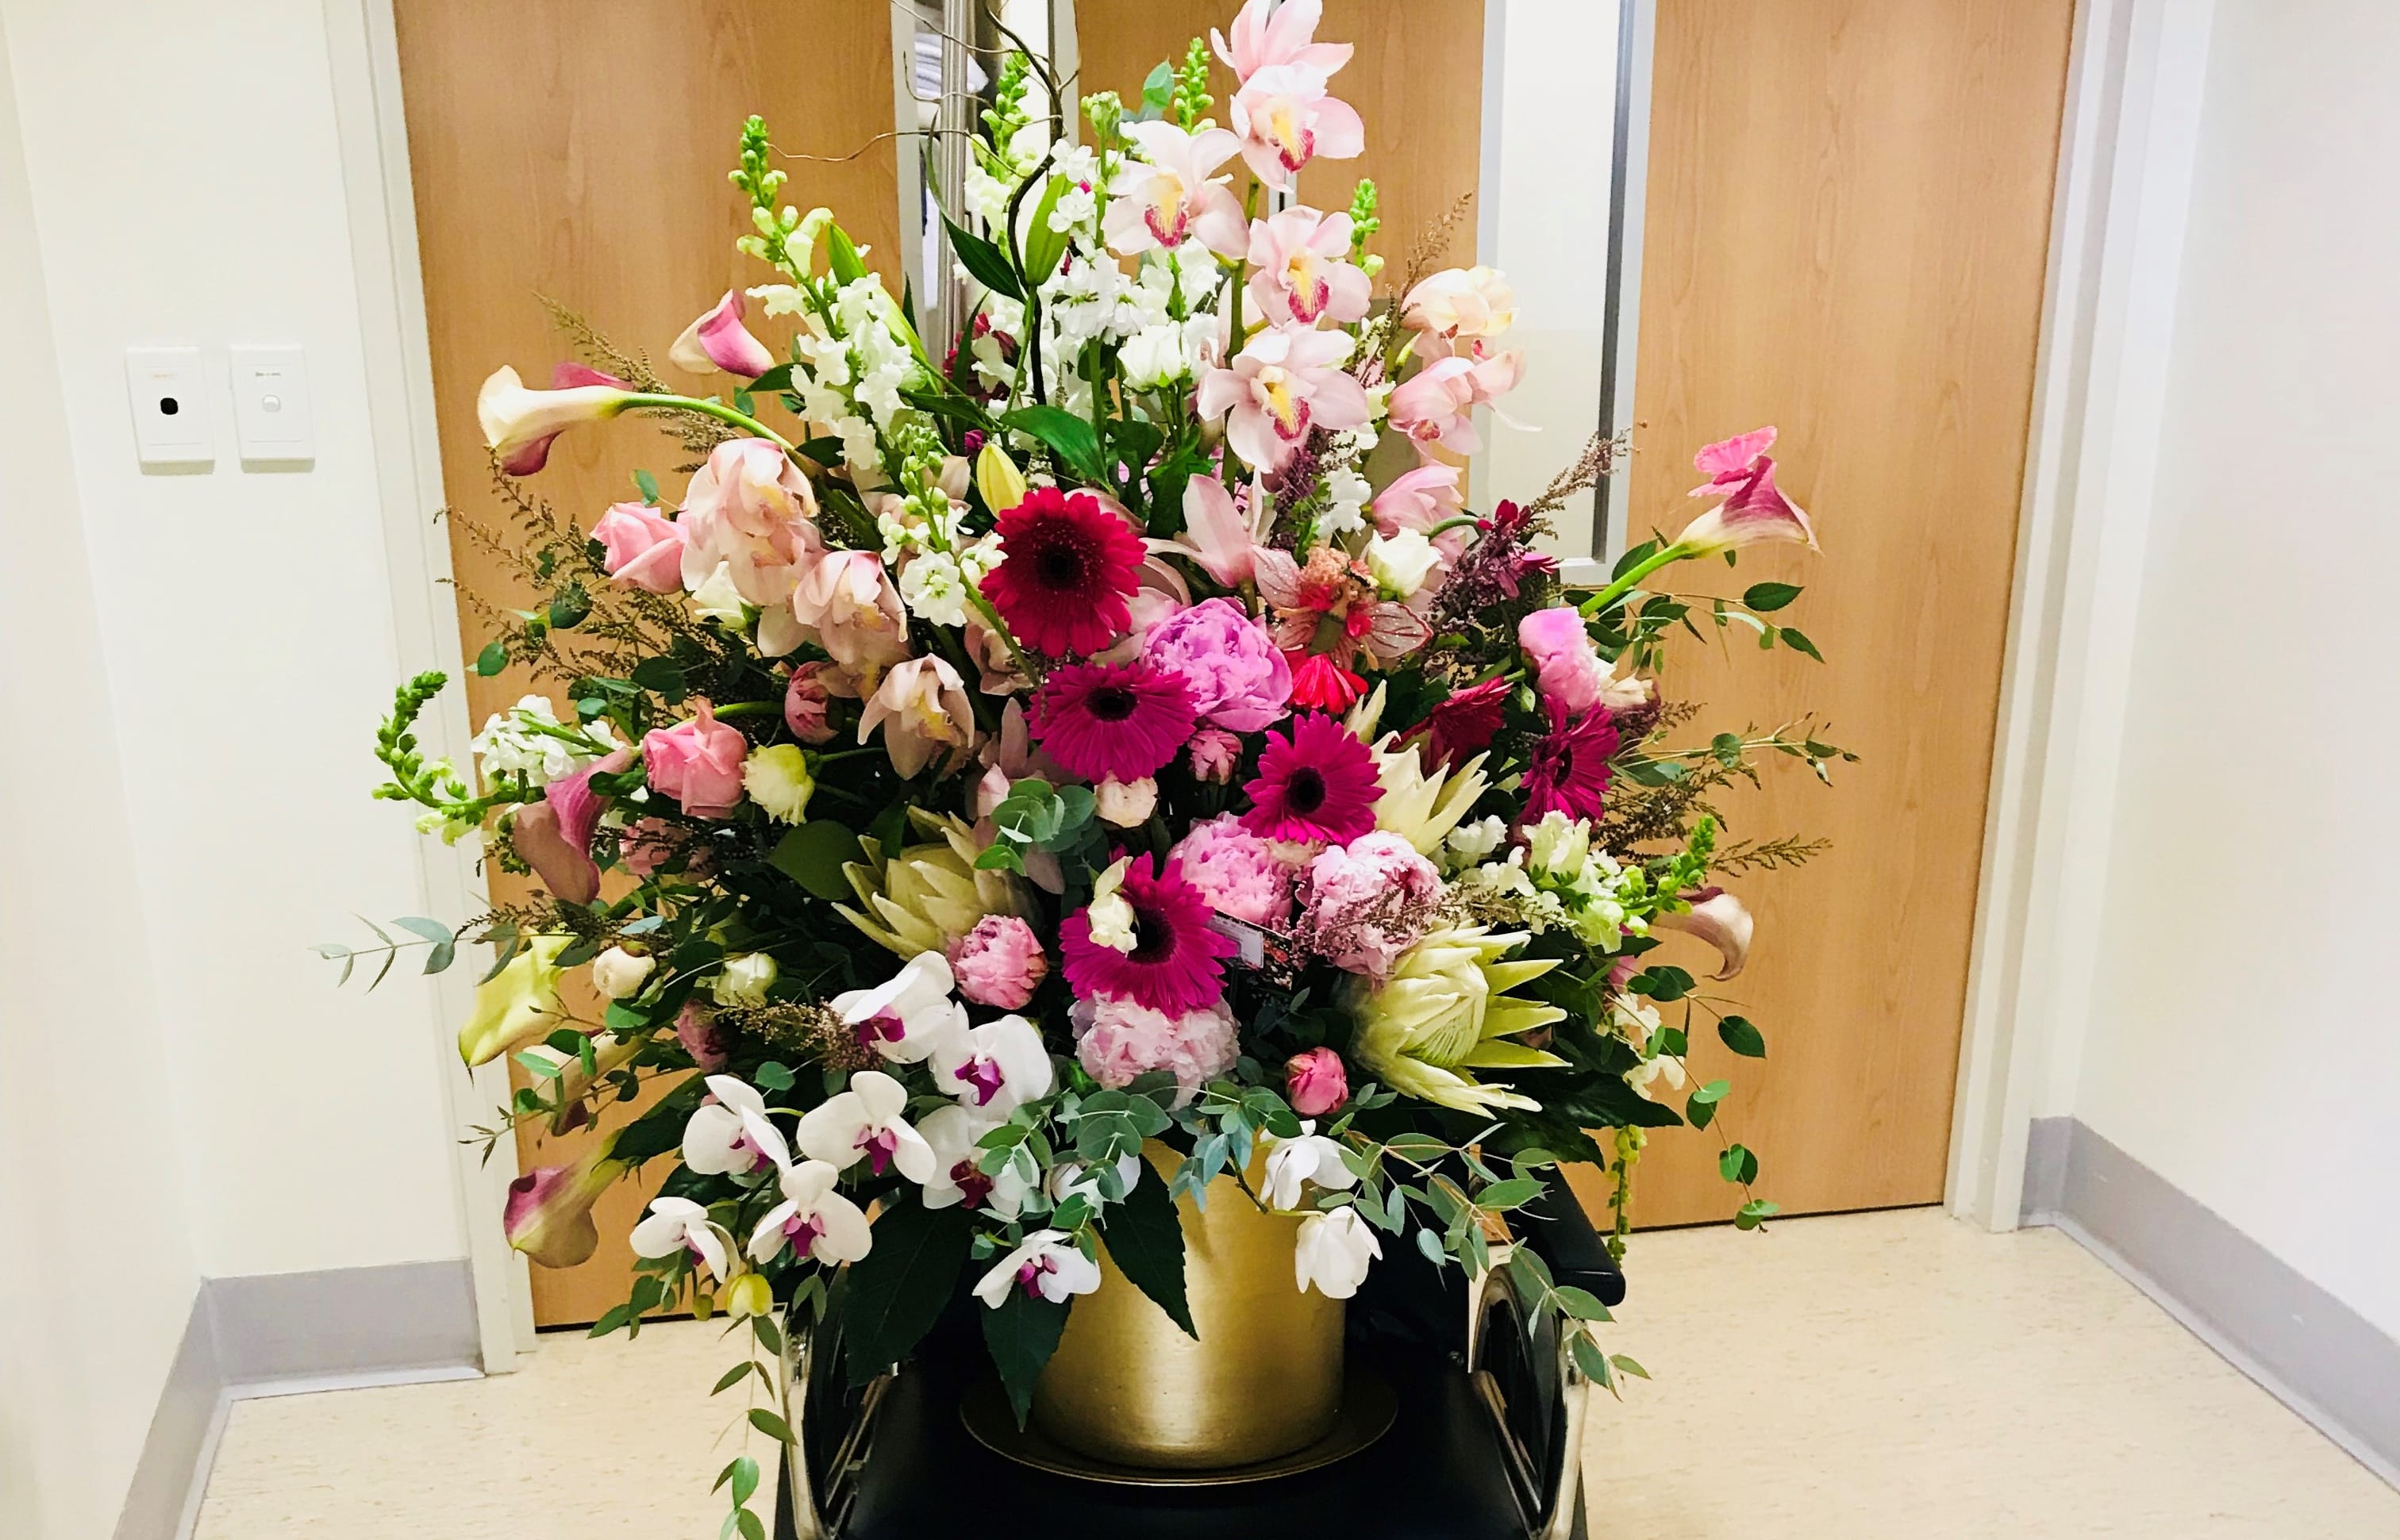 The flowers Prime Minister Jacinda Ardern received from the Embassy of the Kingdom of Saudi Arabia.